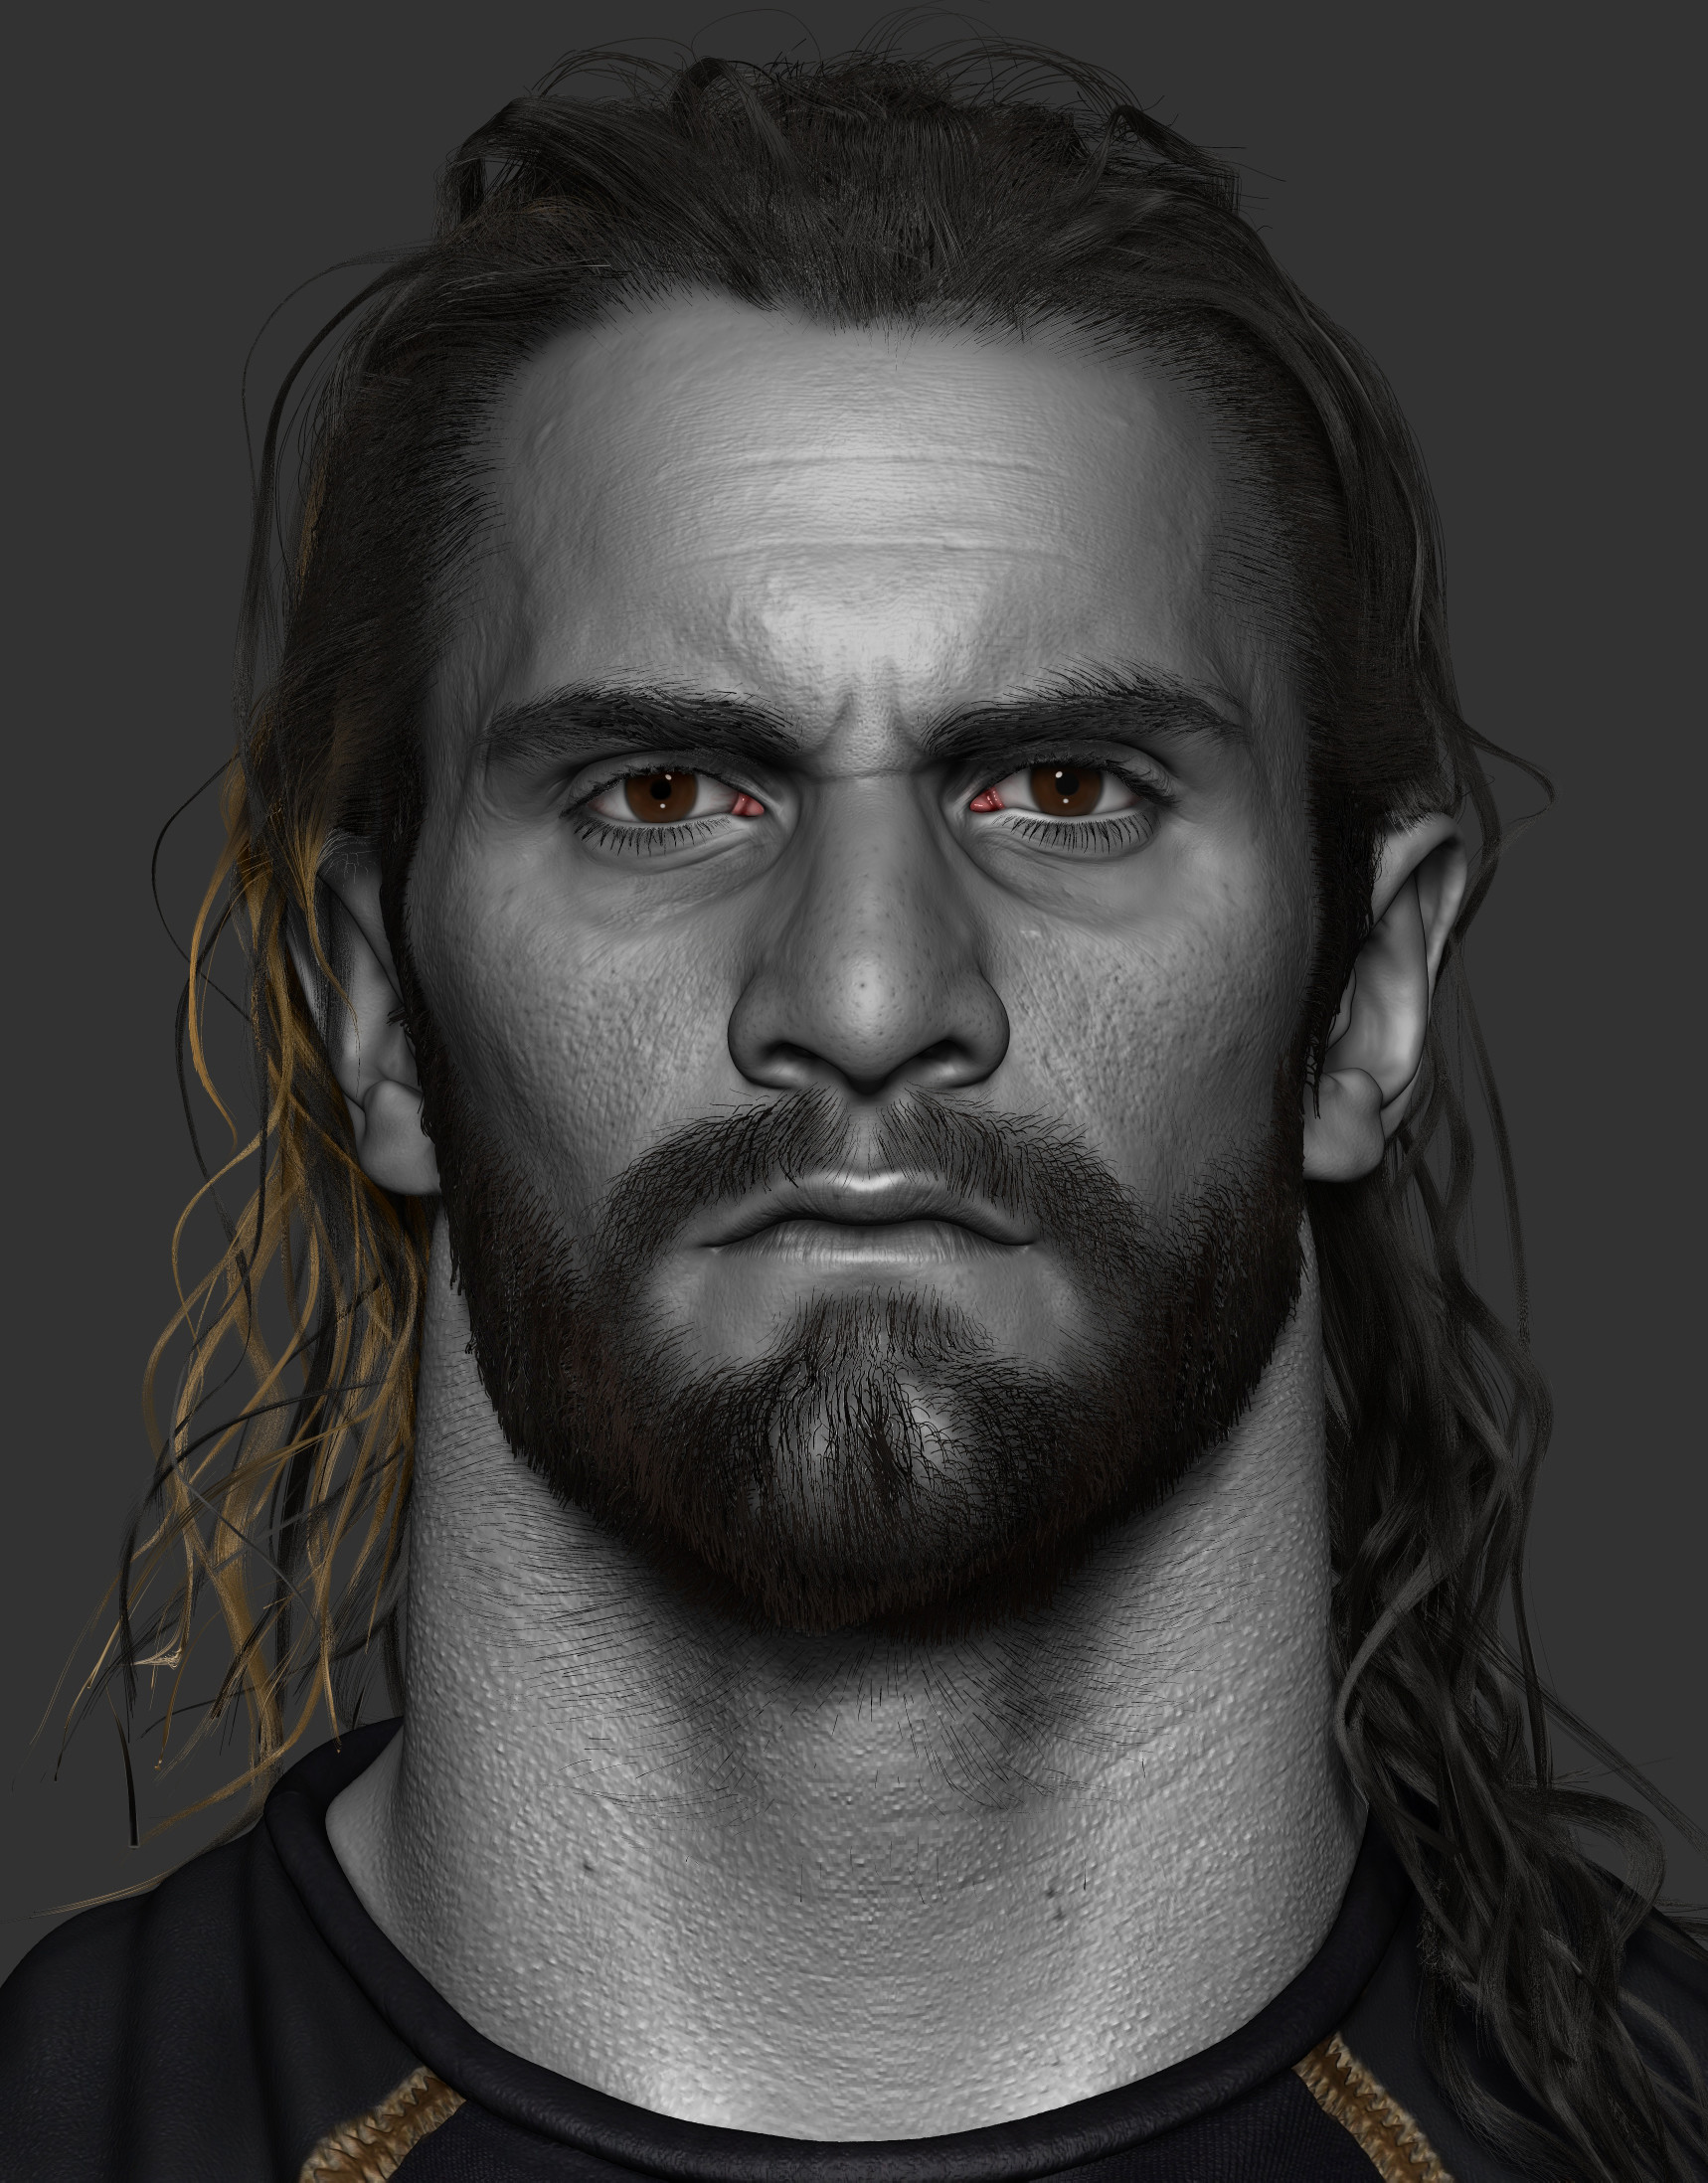 Seth Rollins drawing #2 by MysteryOfTheFuture on DeviantArt